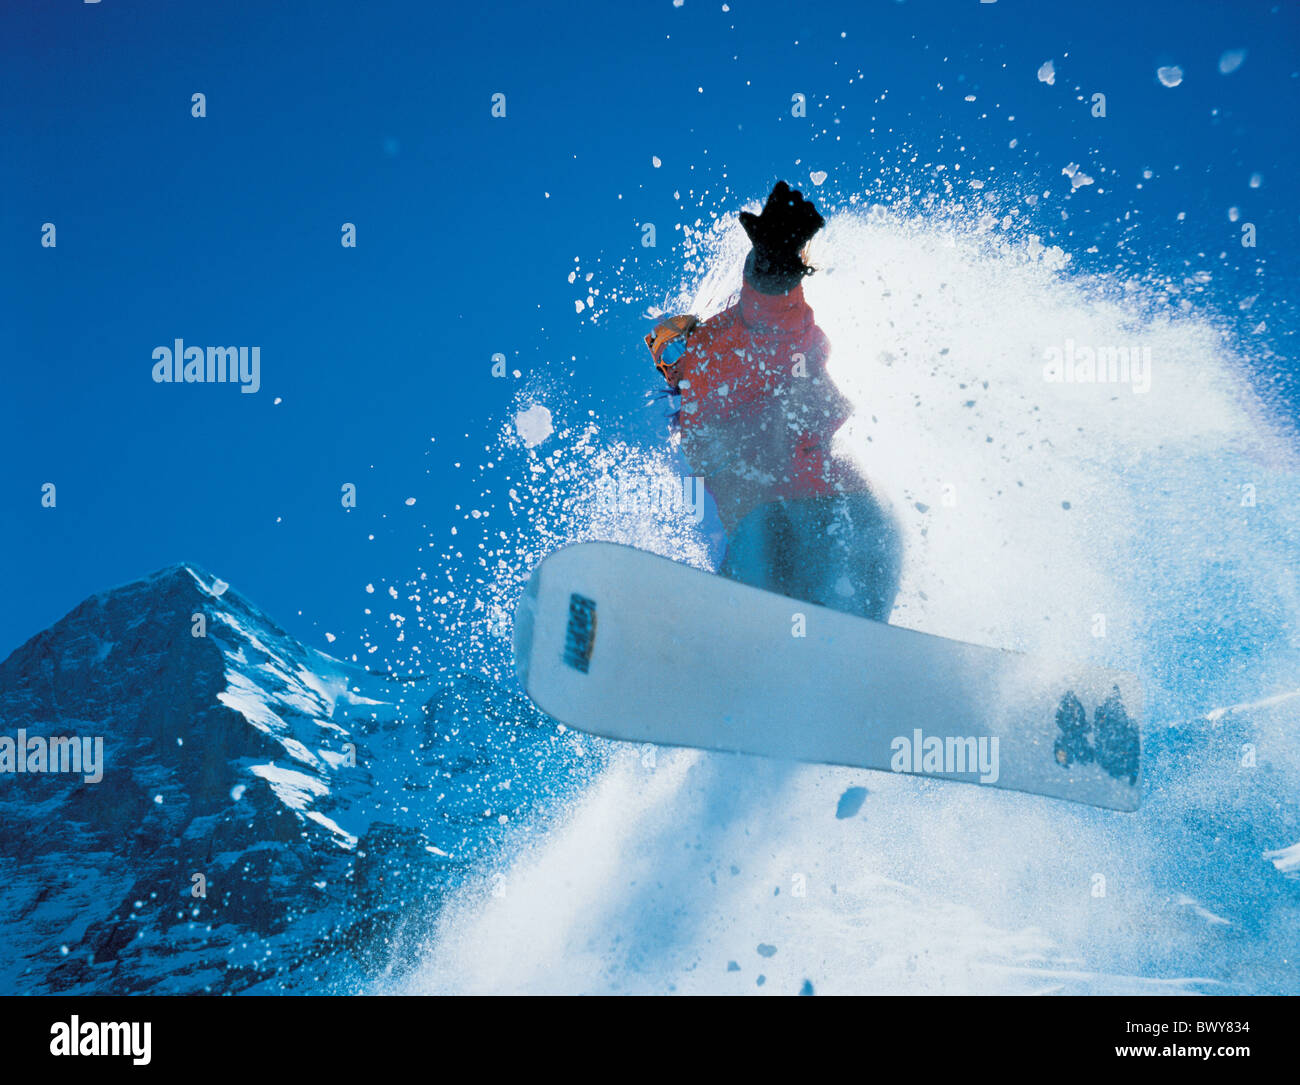 action jump jumping mountains snow snowboard Snowboard Snowboarder sports sun winter Stock Photo